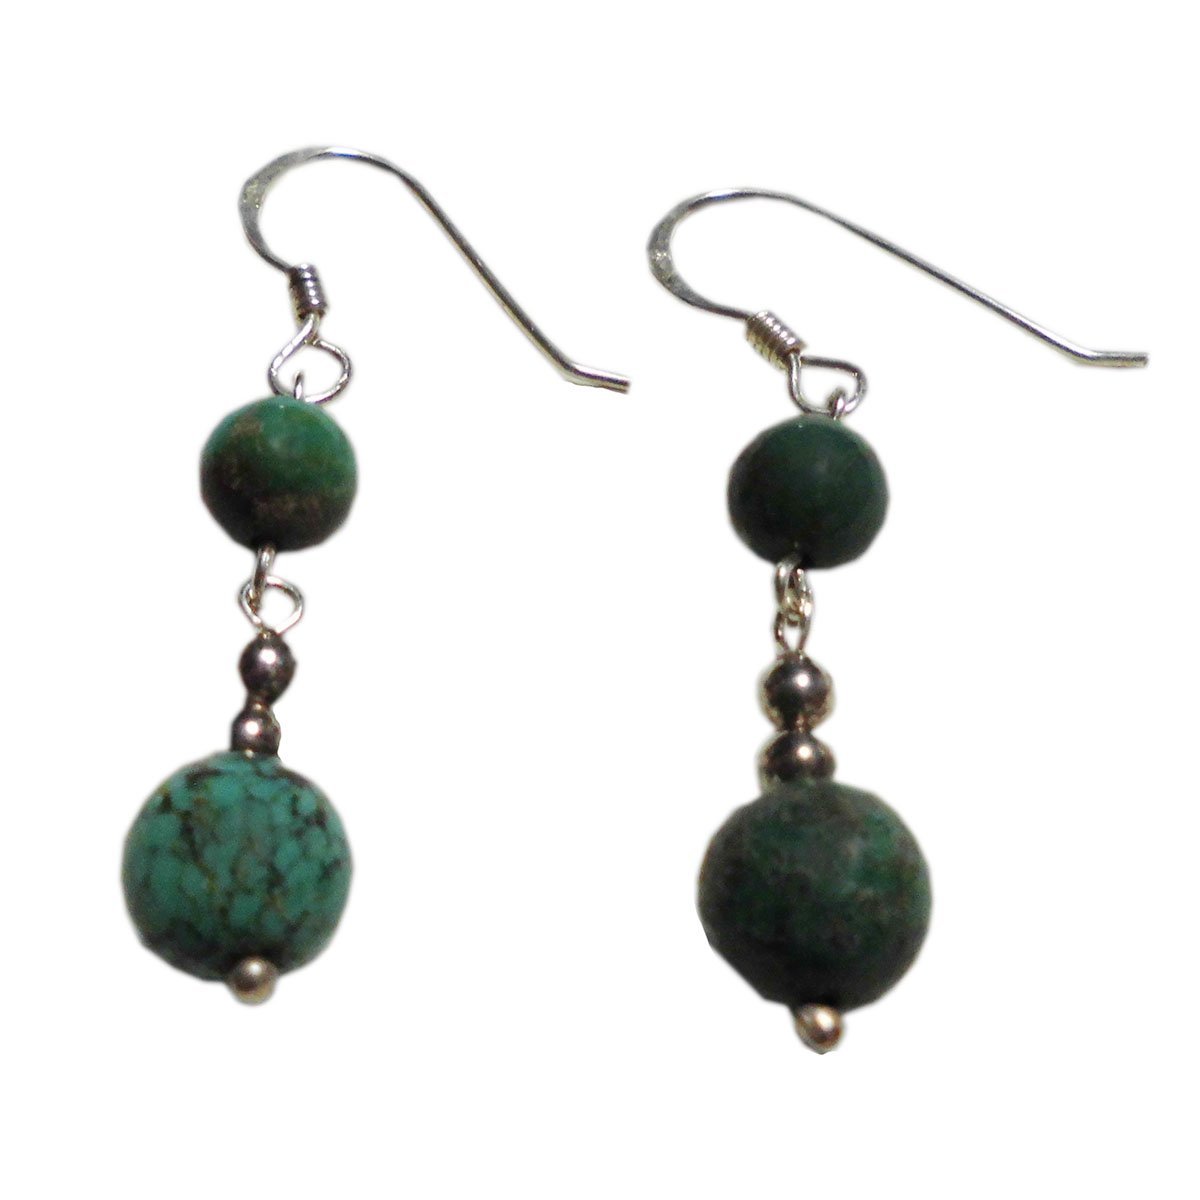 ■☆Handmade accessories Silver earrings Turquoise (HDP-4), Earrings, Colored Stones, Turquoise